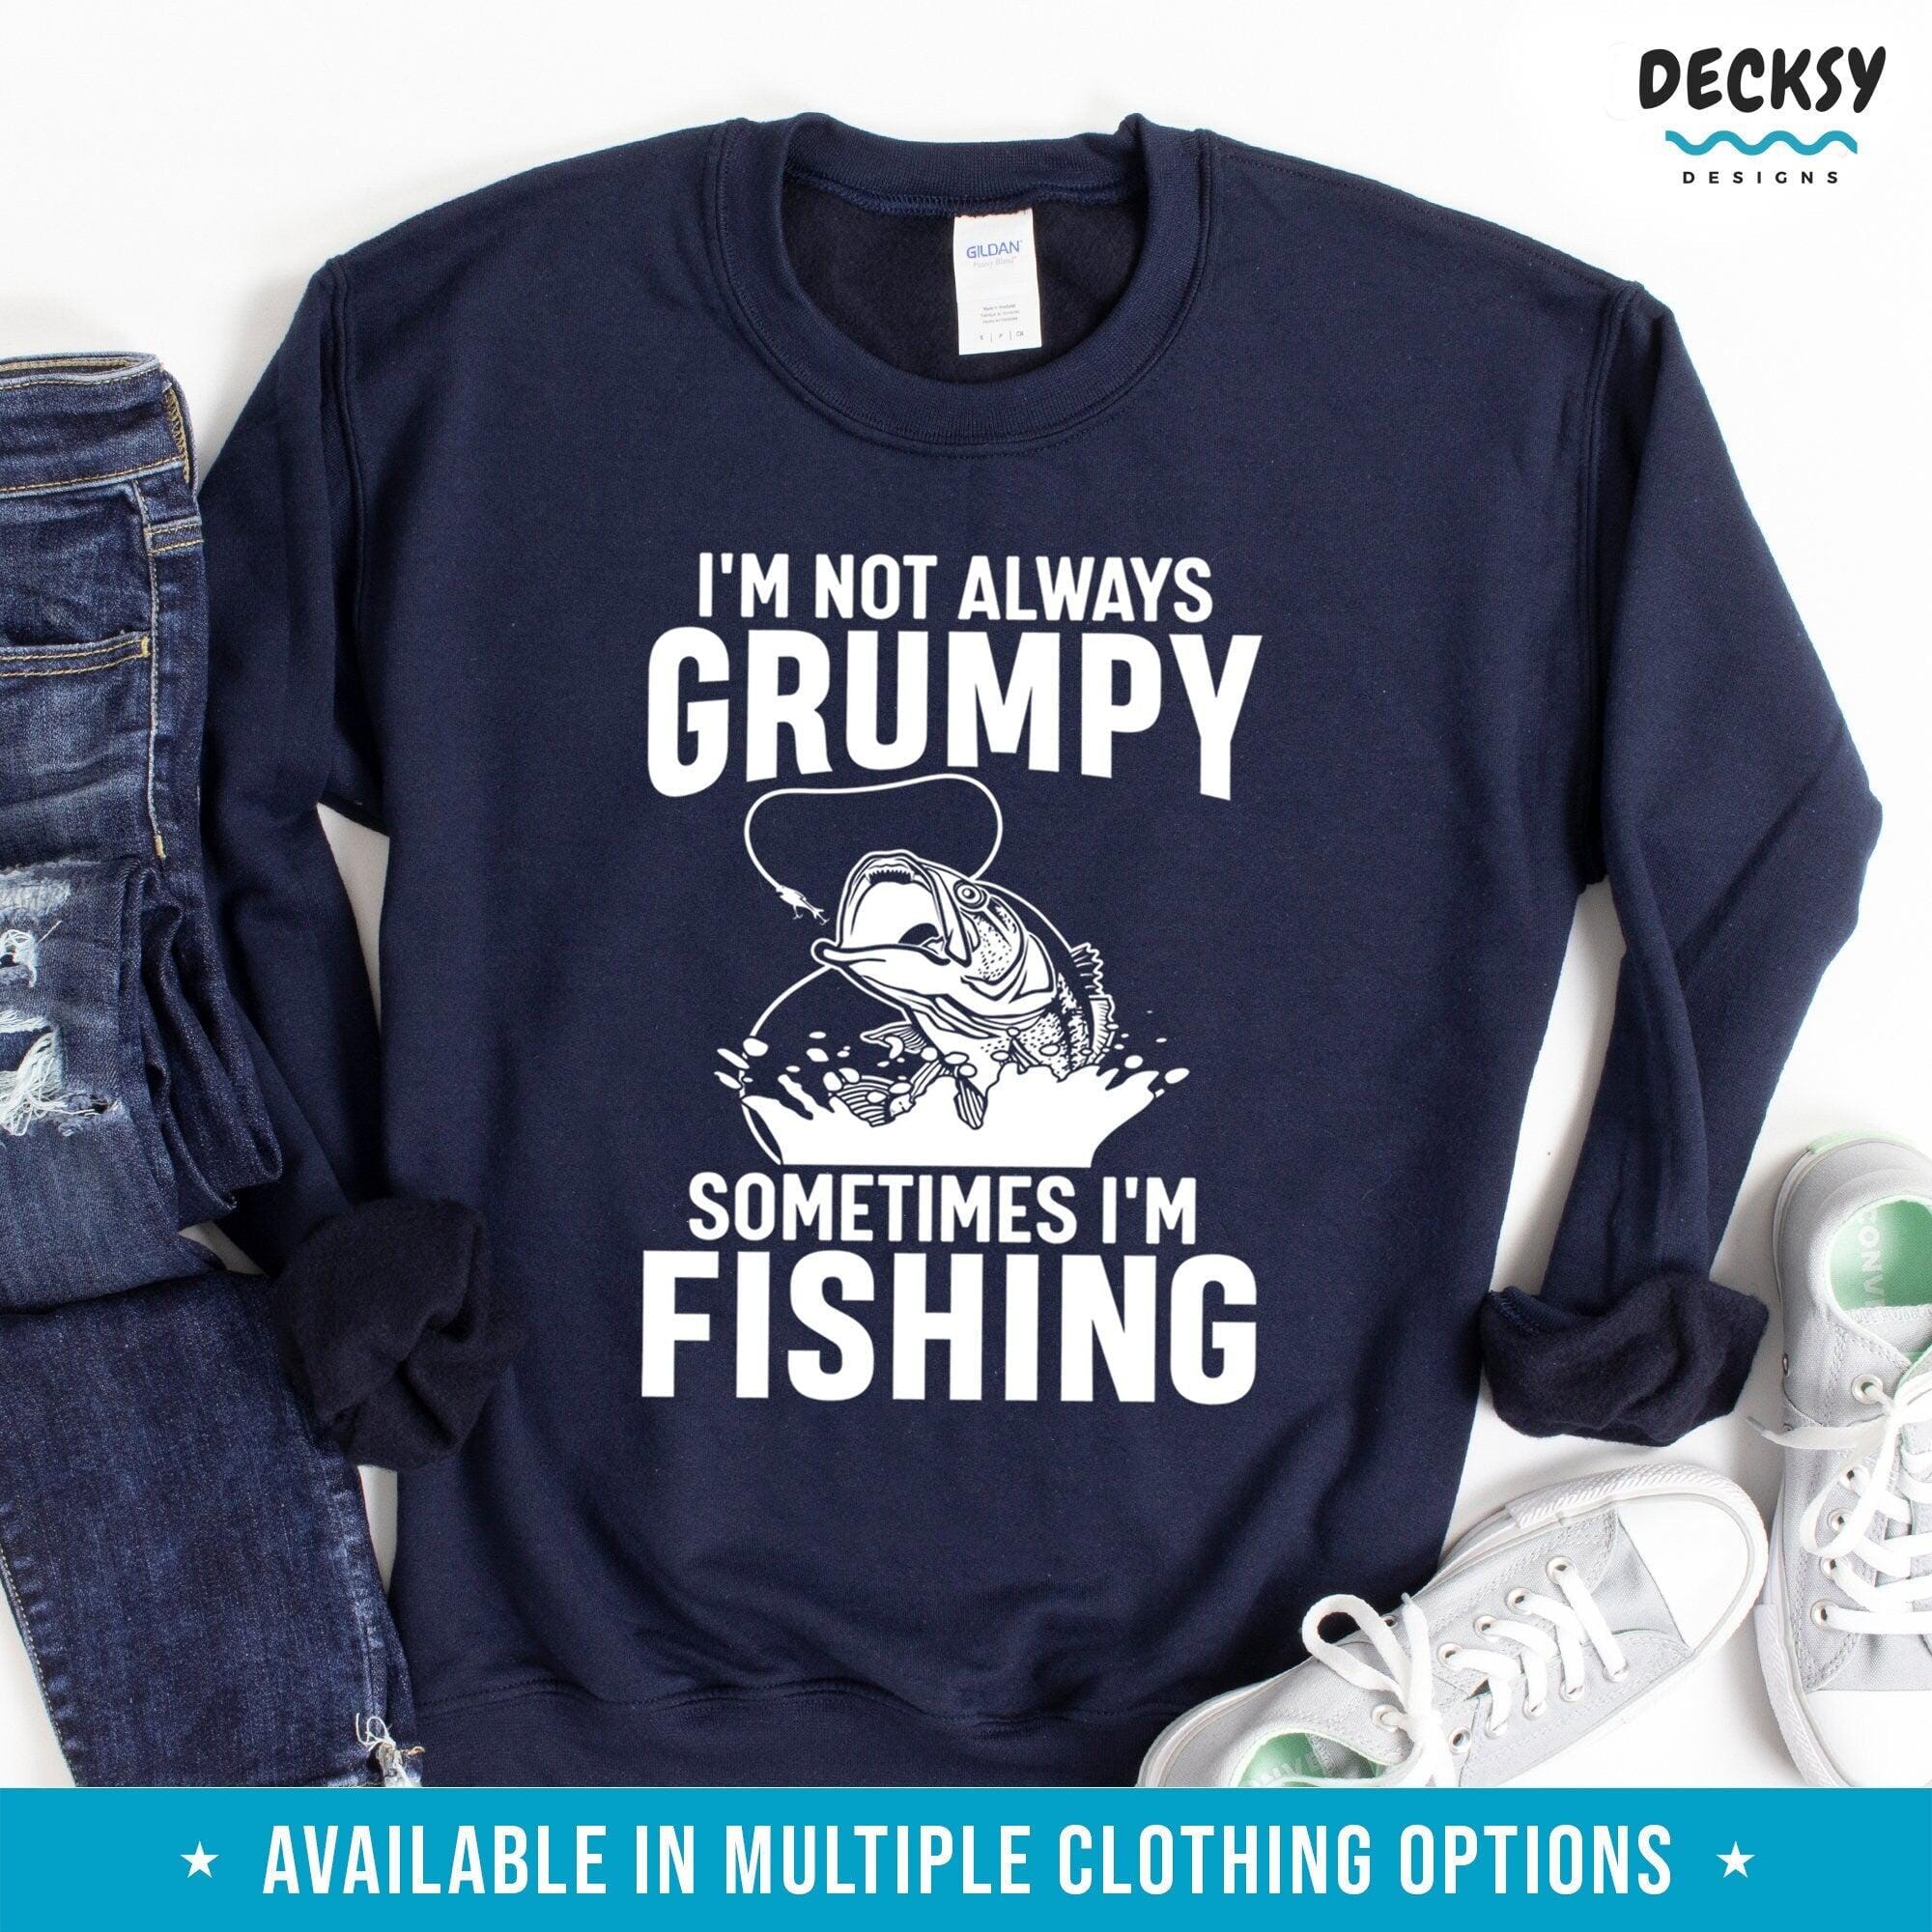 Fishing Tshirt, Gift for Fisherman-Clothing:Gender-Neutral Adult Clothing:Tops & Tees:T-shirts:Graphic Tees-DecksyDesigns